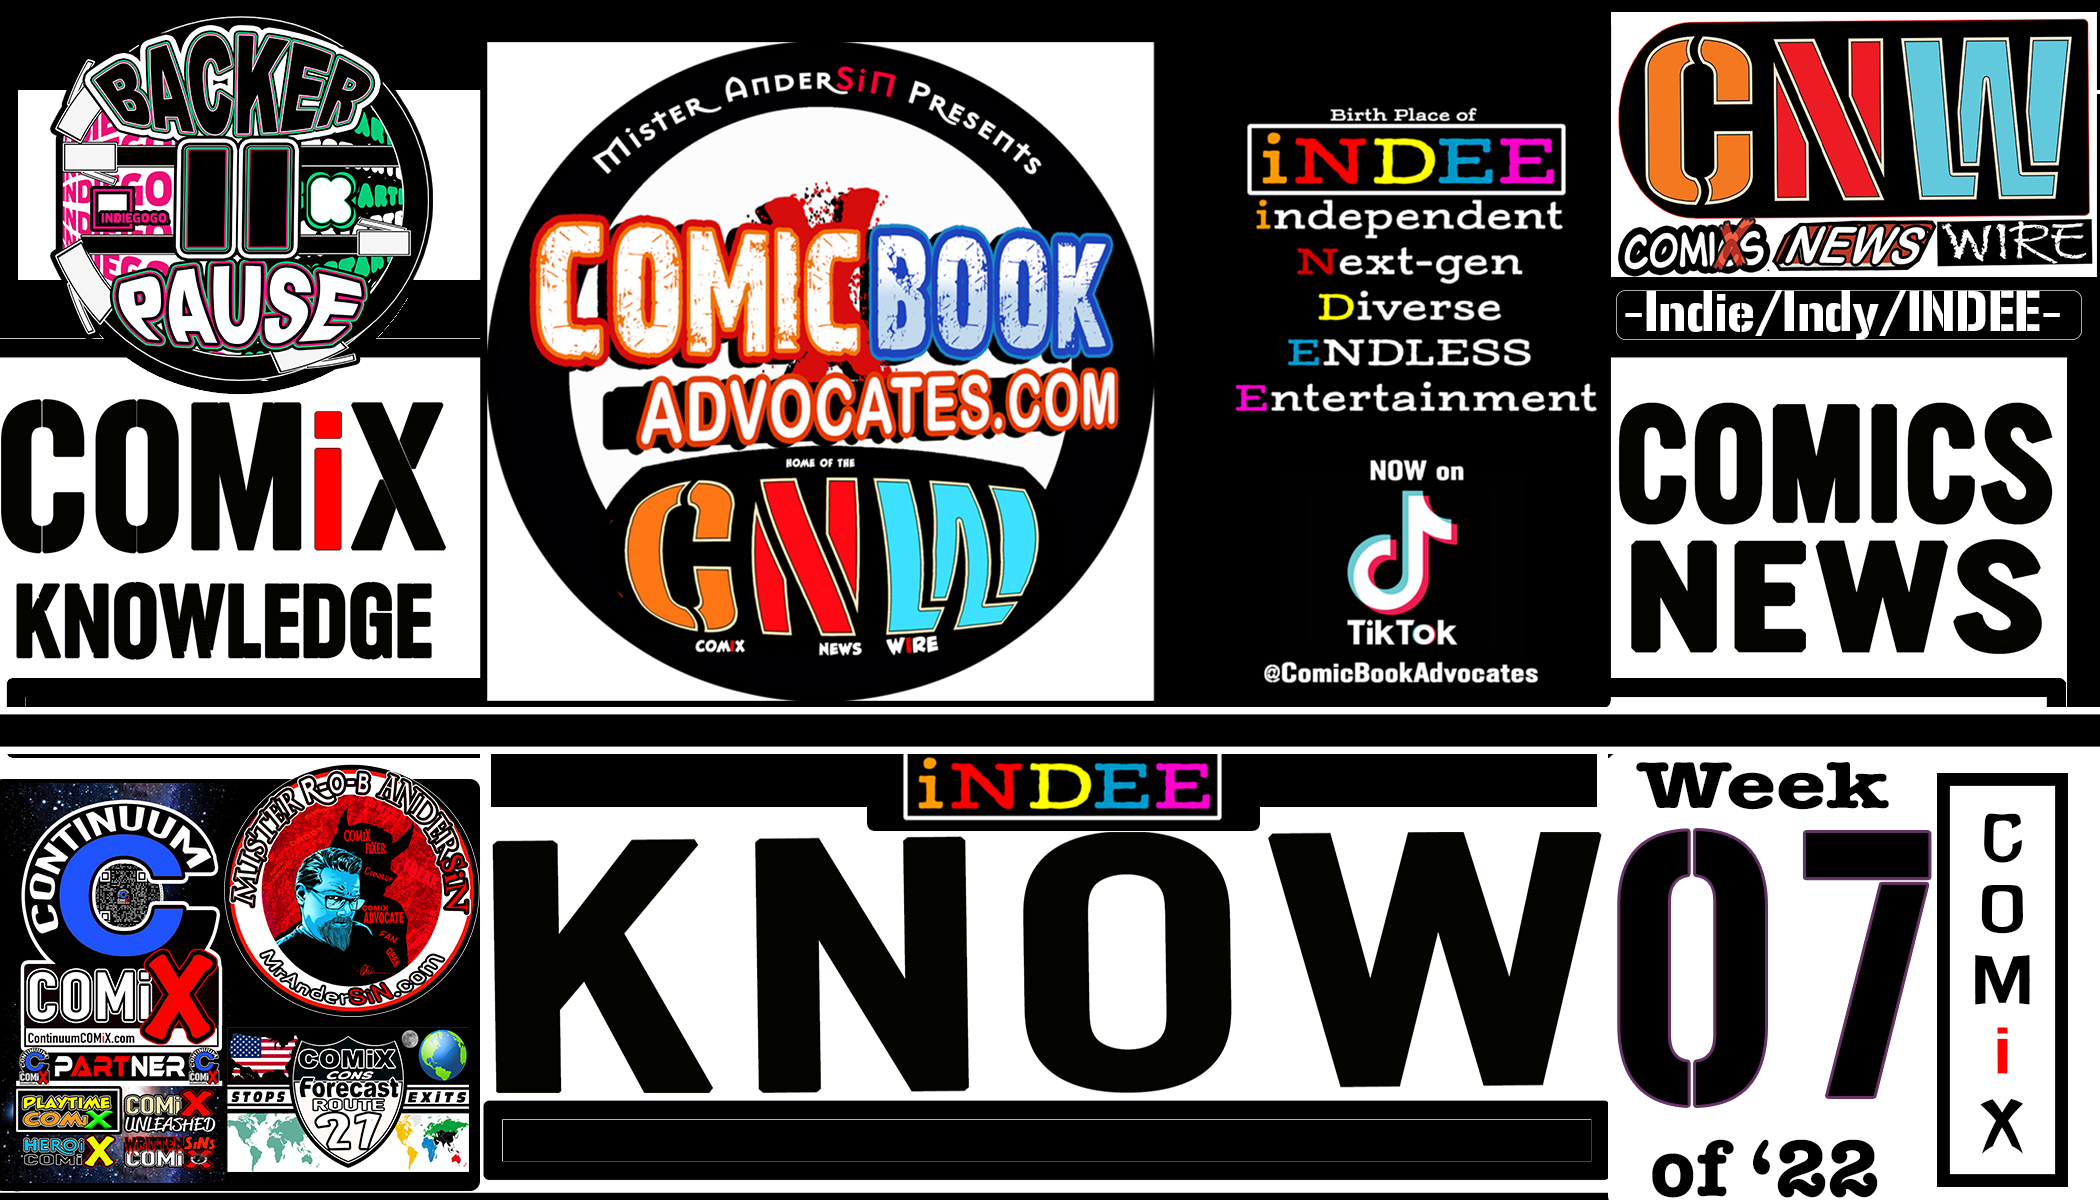 The INDEE NEWS WiRE-Week  7 of 2022 – Date  feb 14th-20th of 2022- THE COMiX NEWS WiRE.